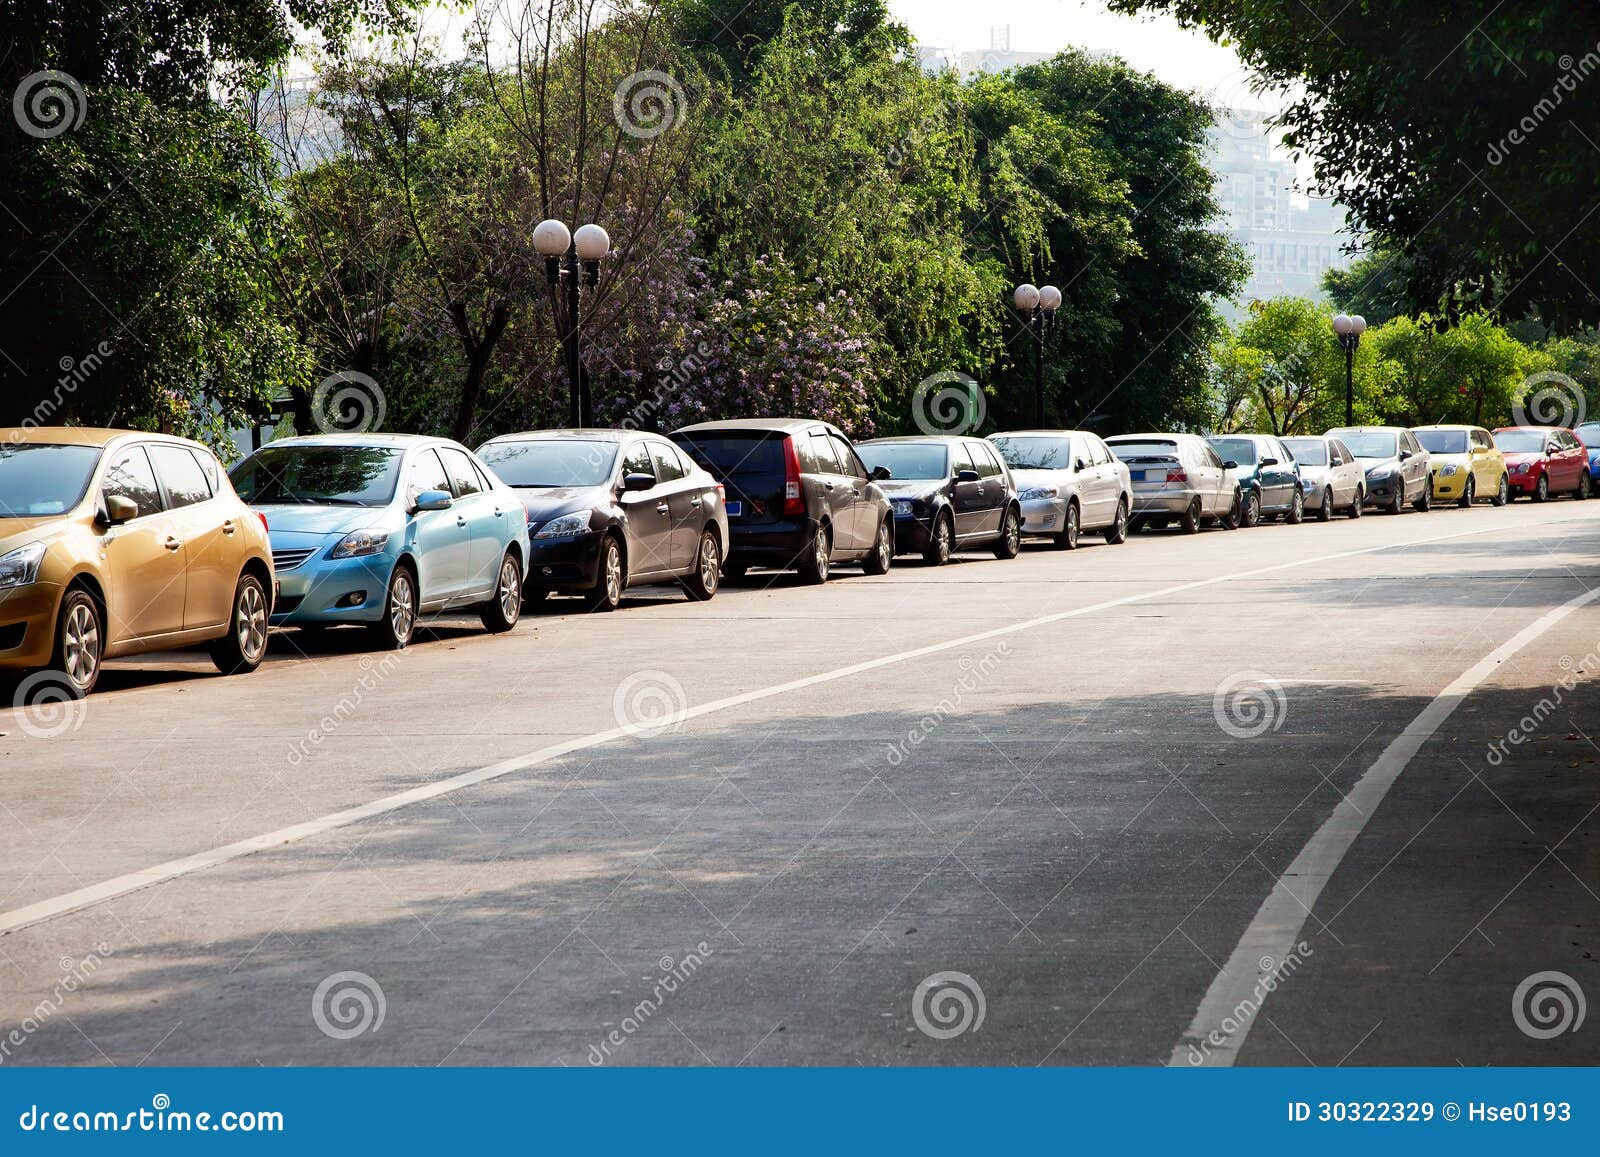 cars parked by the roadside